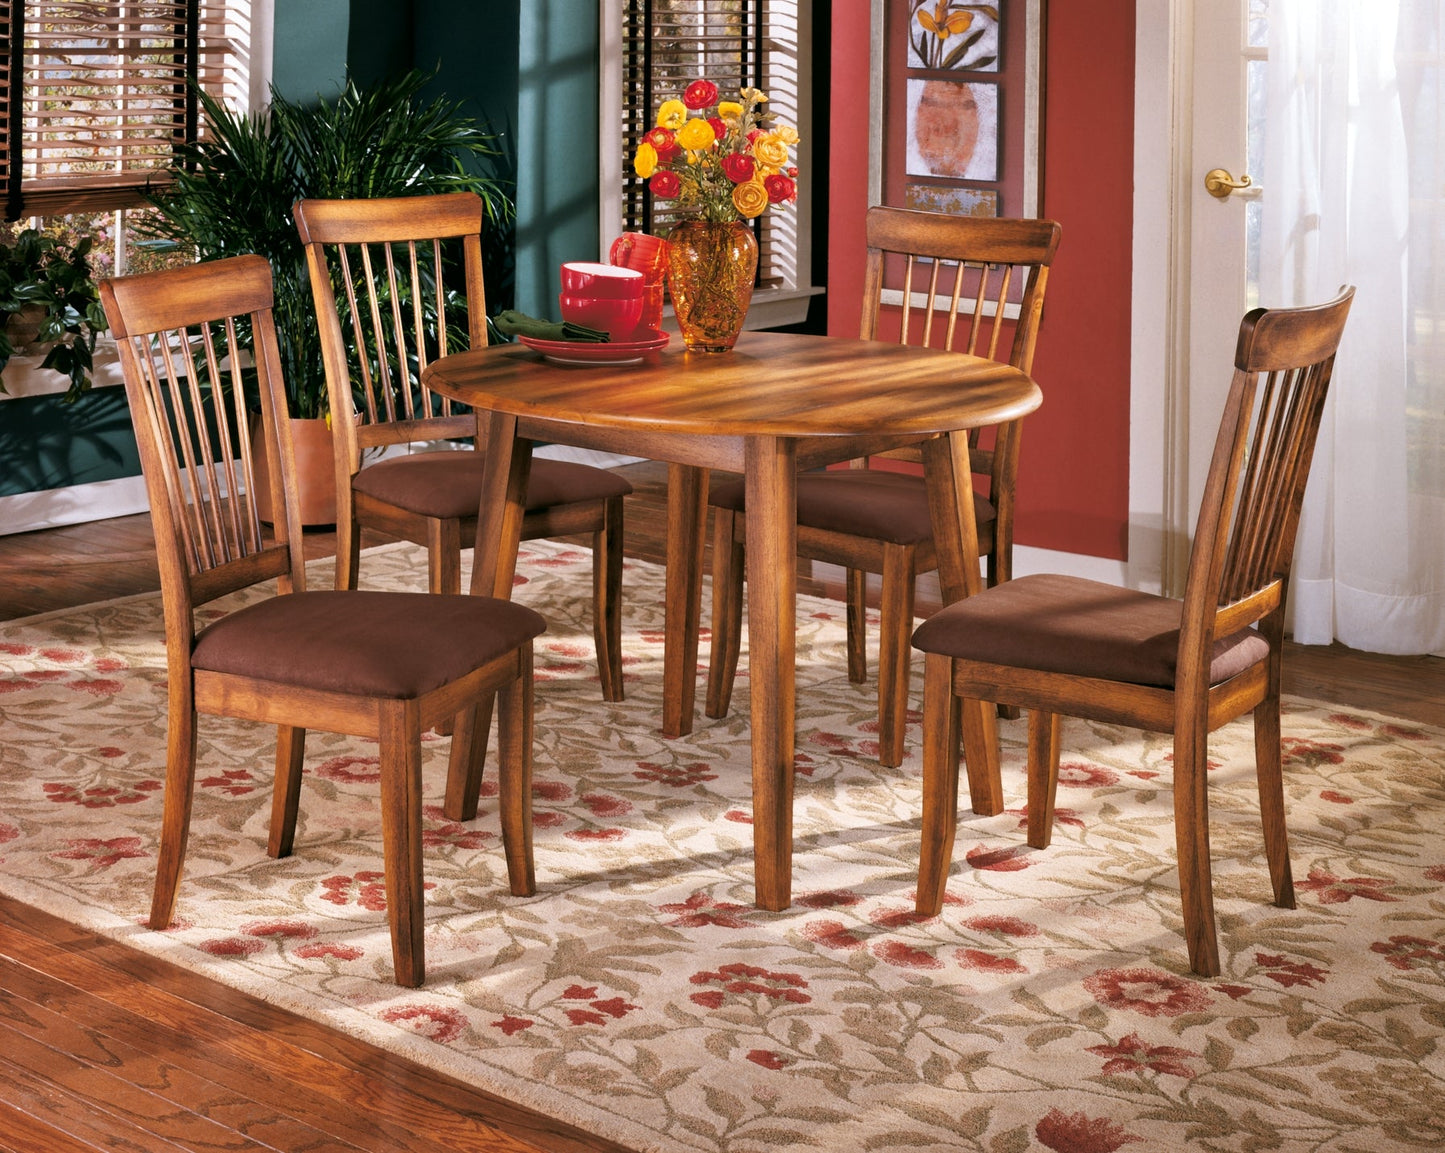 Berringer Dining Table and 4 Chairs Rent Wise Rent To Own Jacksonville, Florida